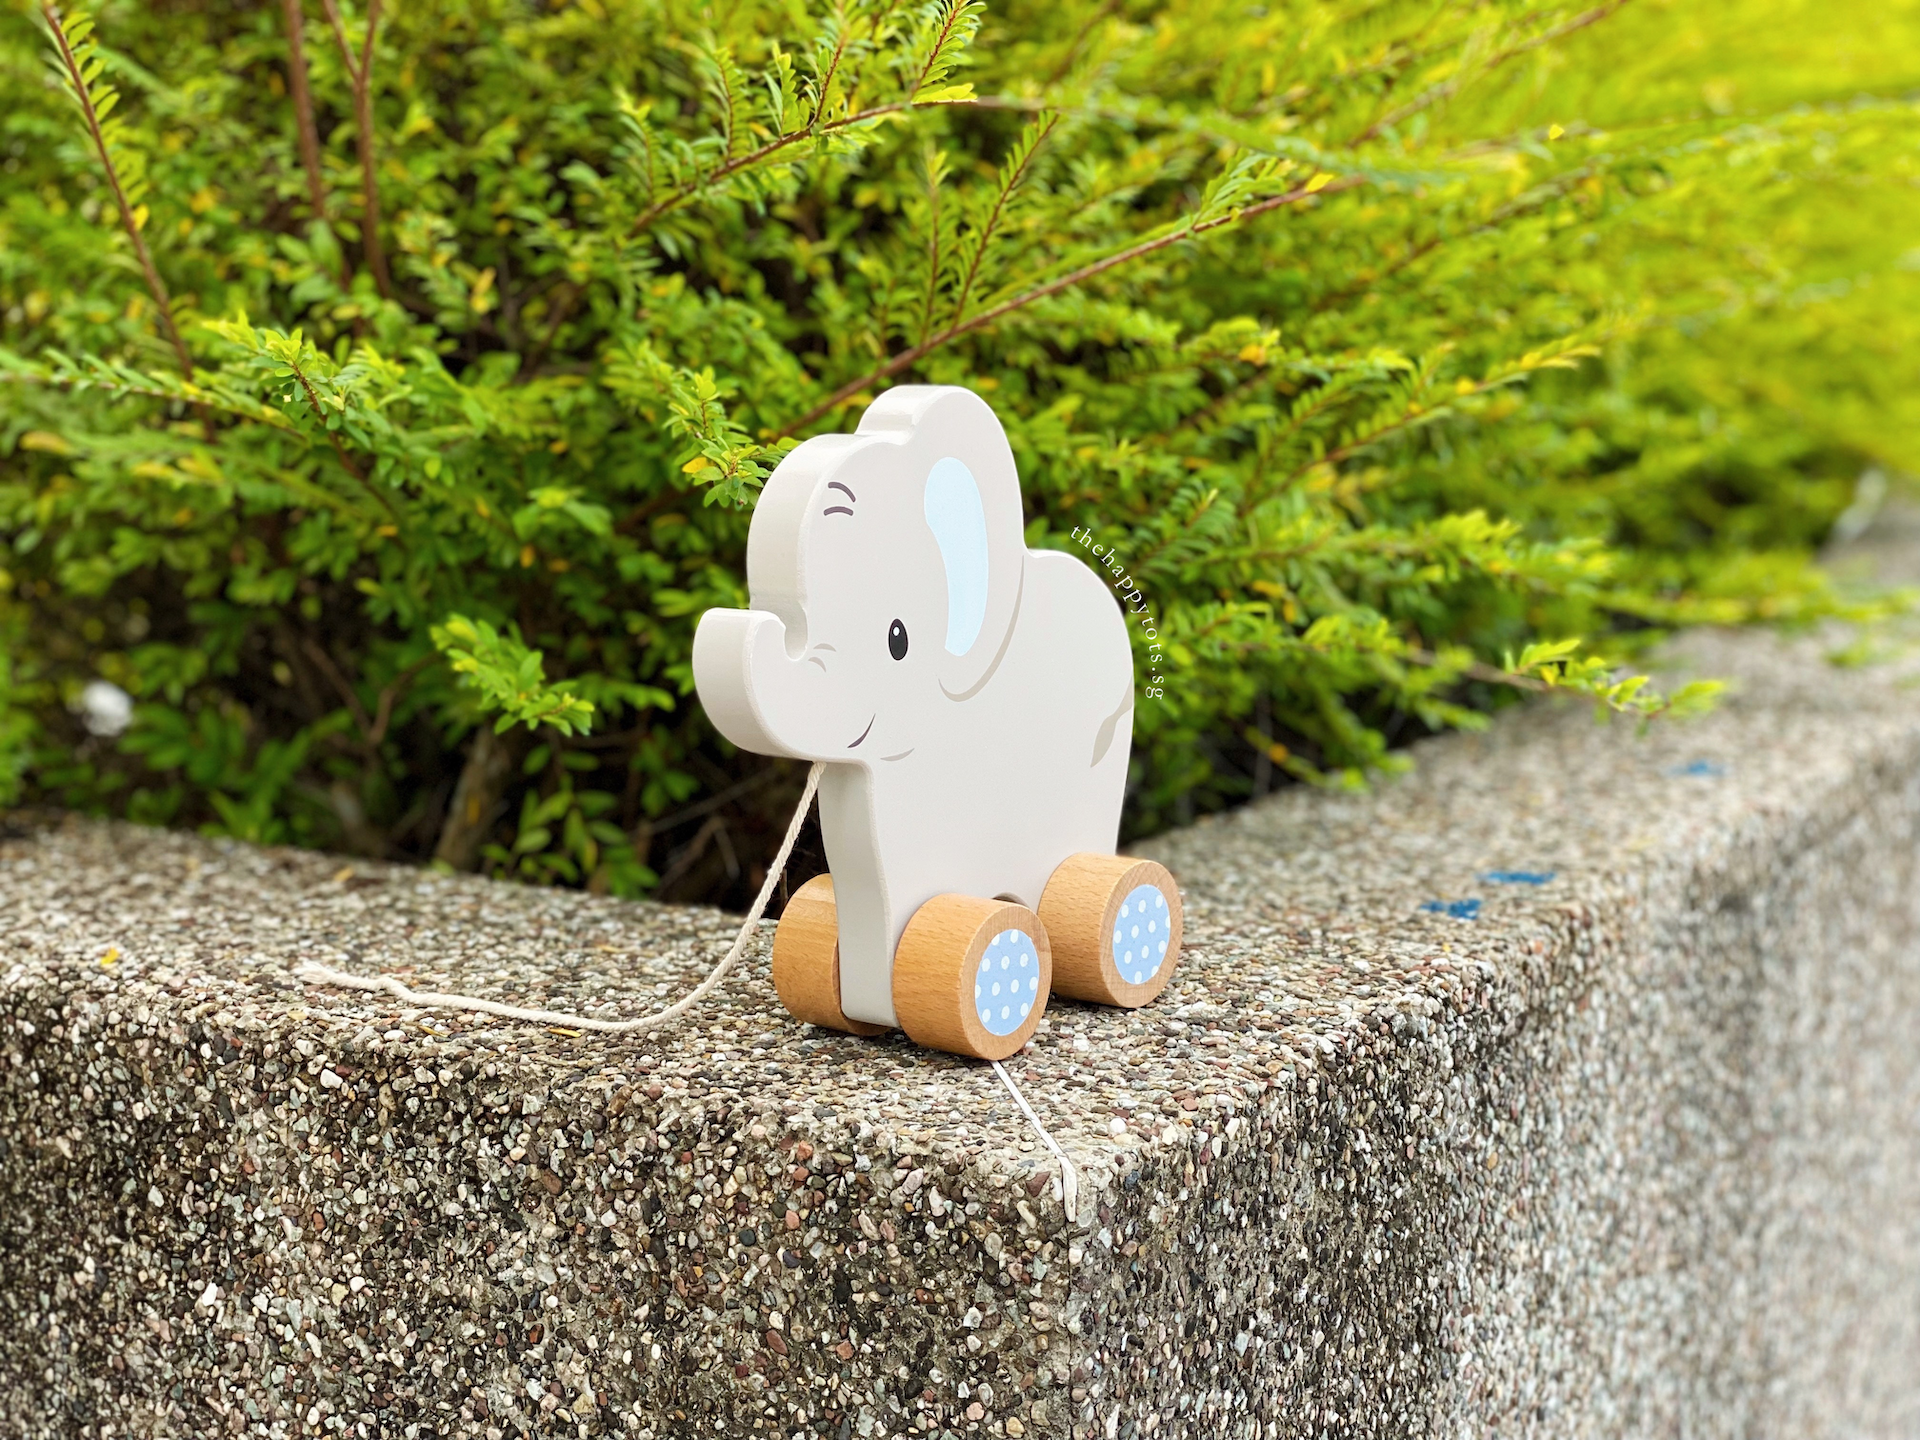 Ellie the Elephant Push and Pull Toy - WERONE